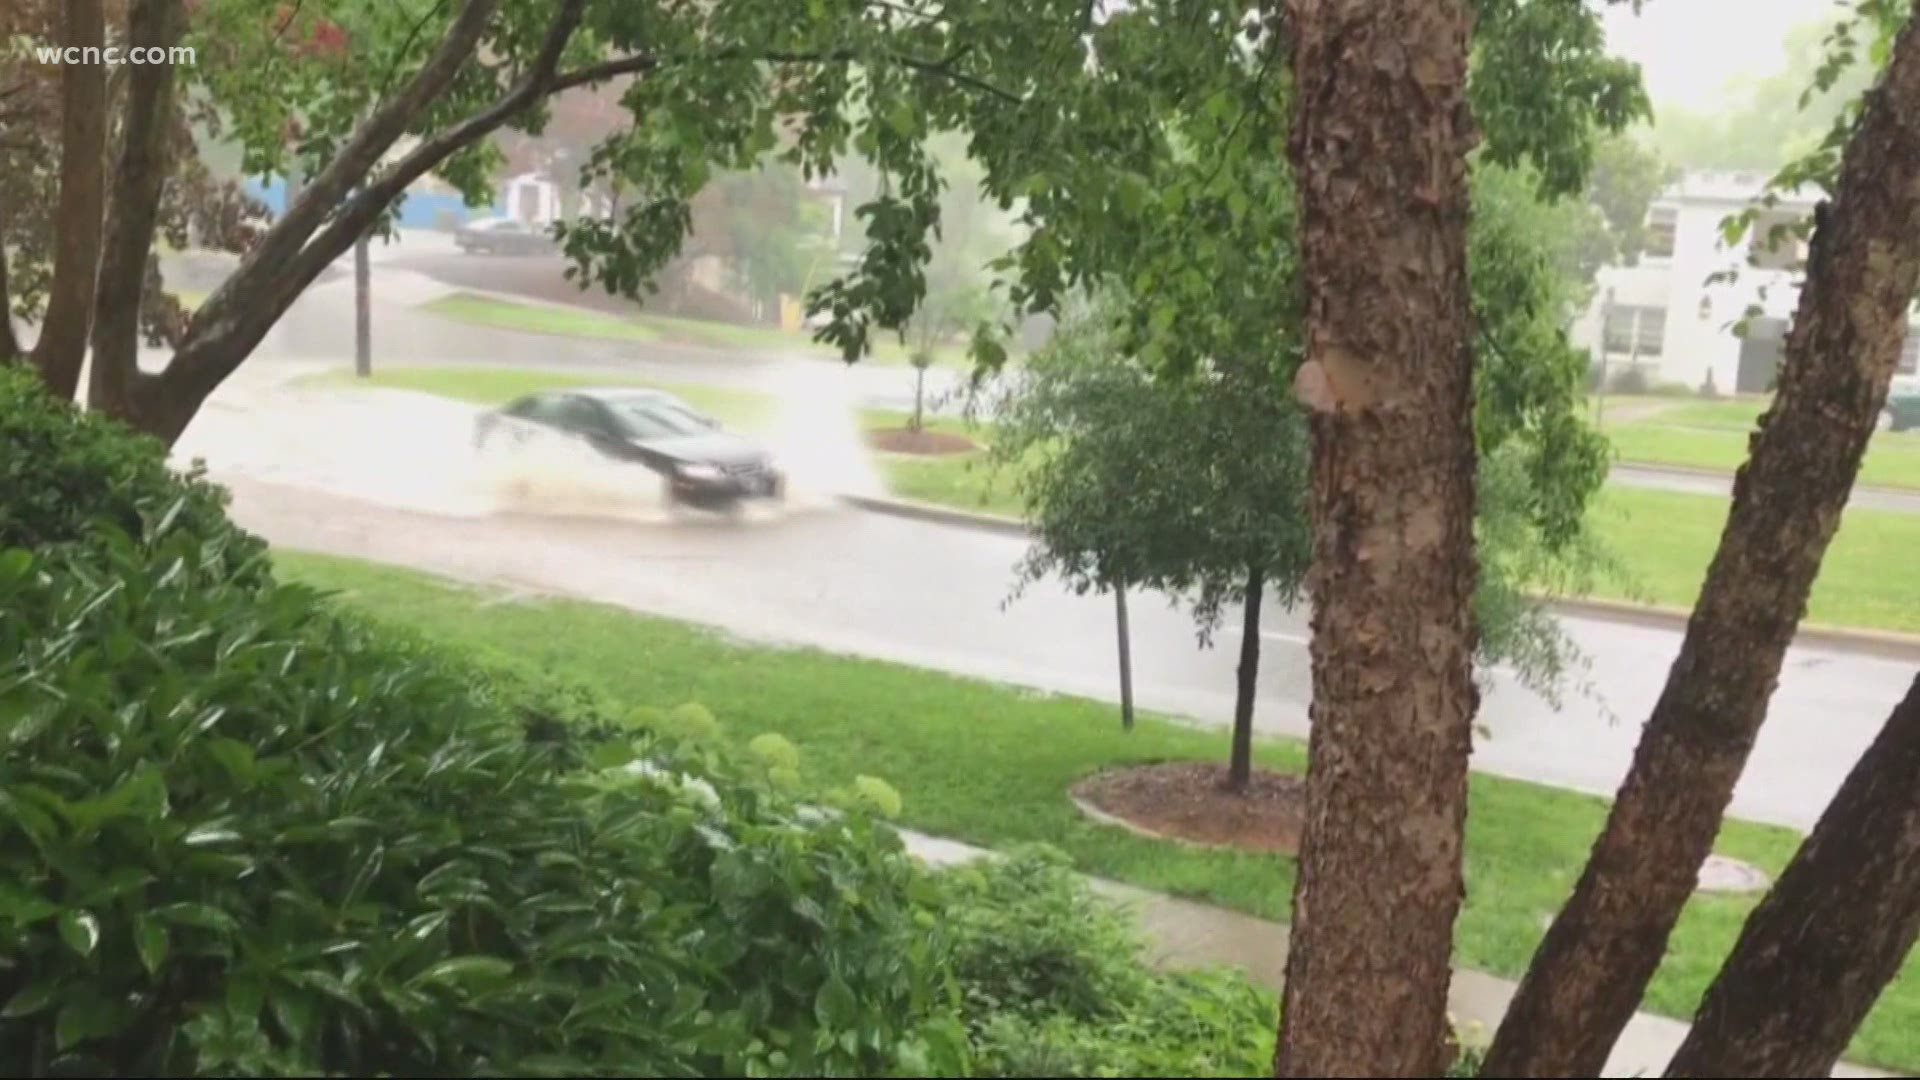 With threats of flash flooding in the Charlotte-Mecklenburg area, families across the city are preparing for the worst.